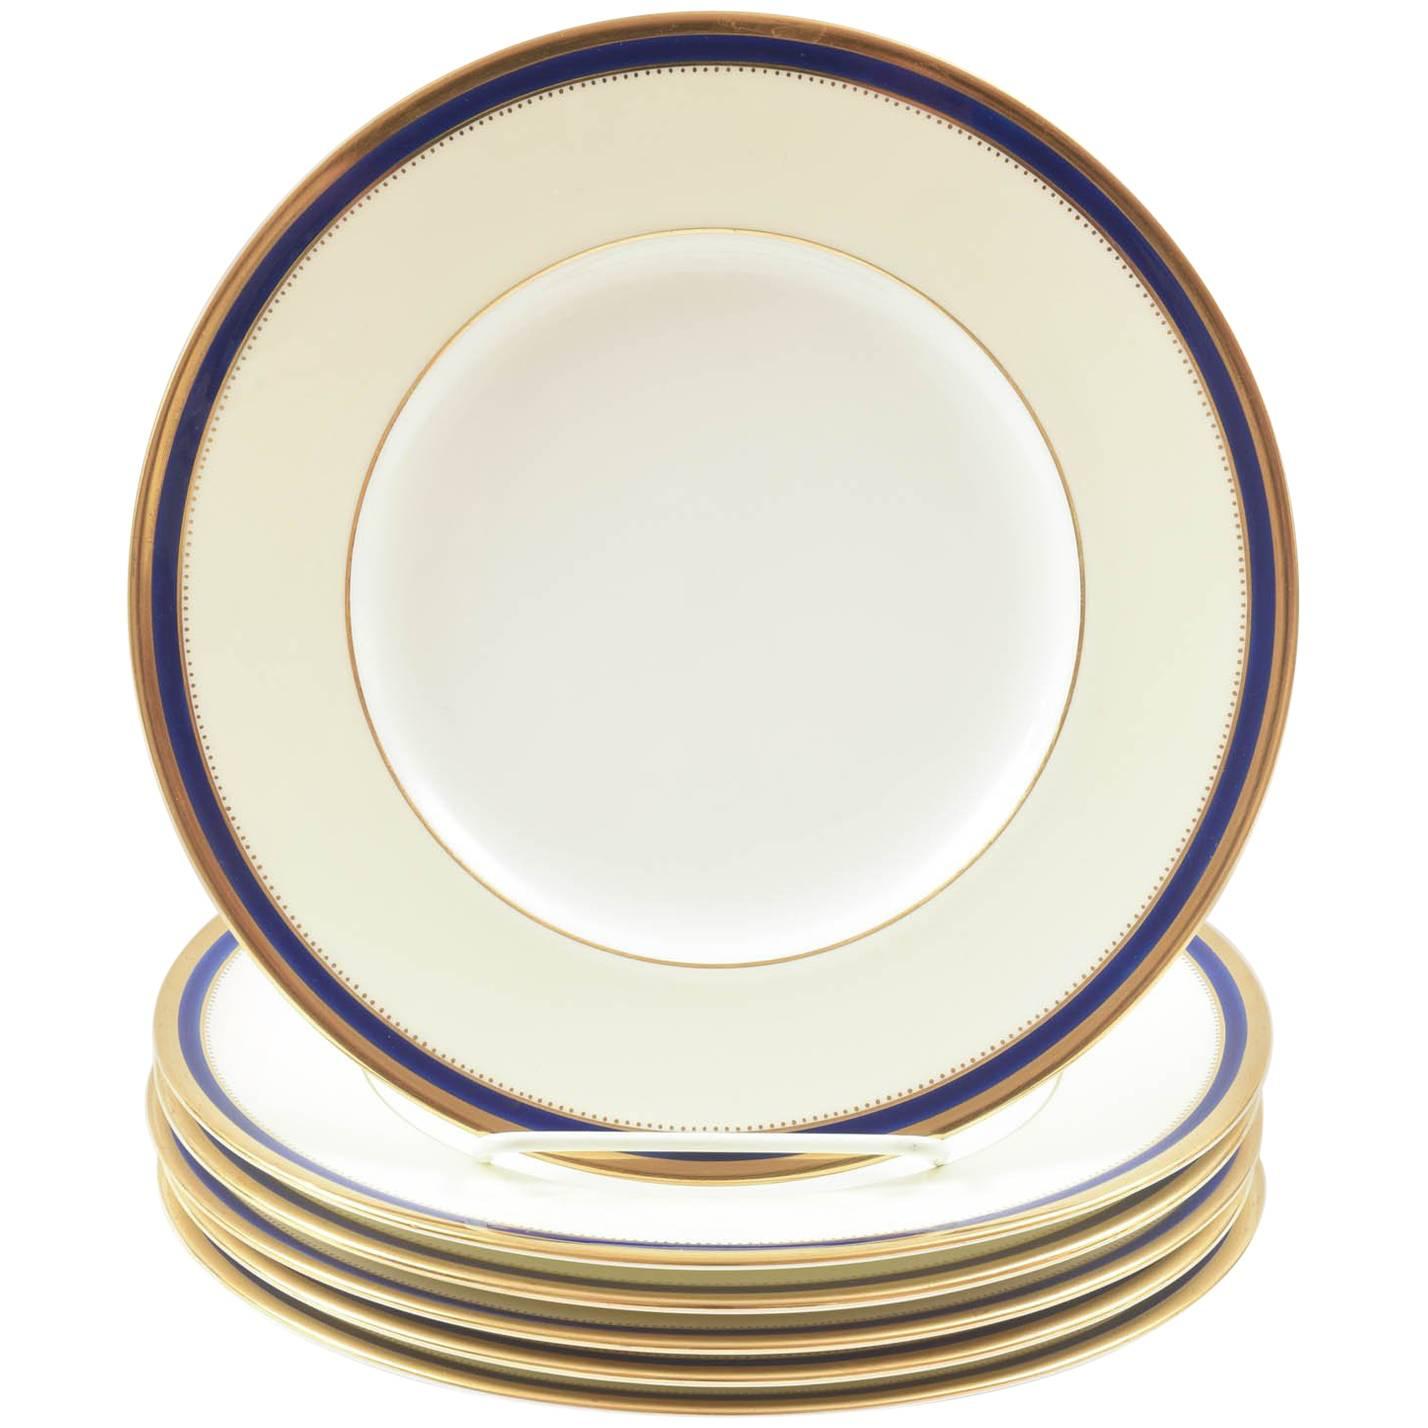 Six Minton England Cobalt Blue and Gold Salad and or Dessert Plates, Antique